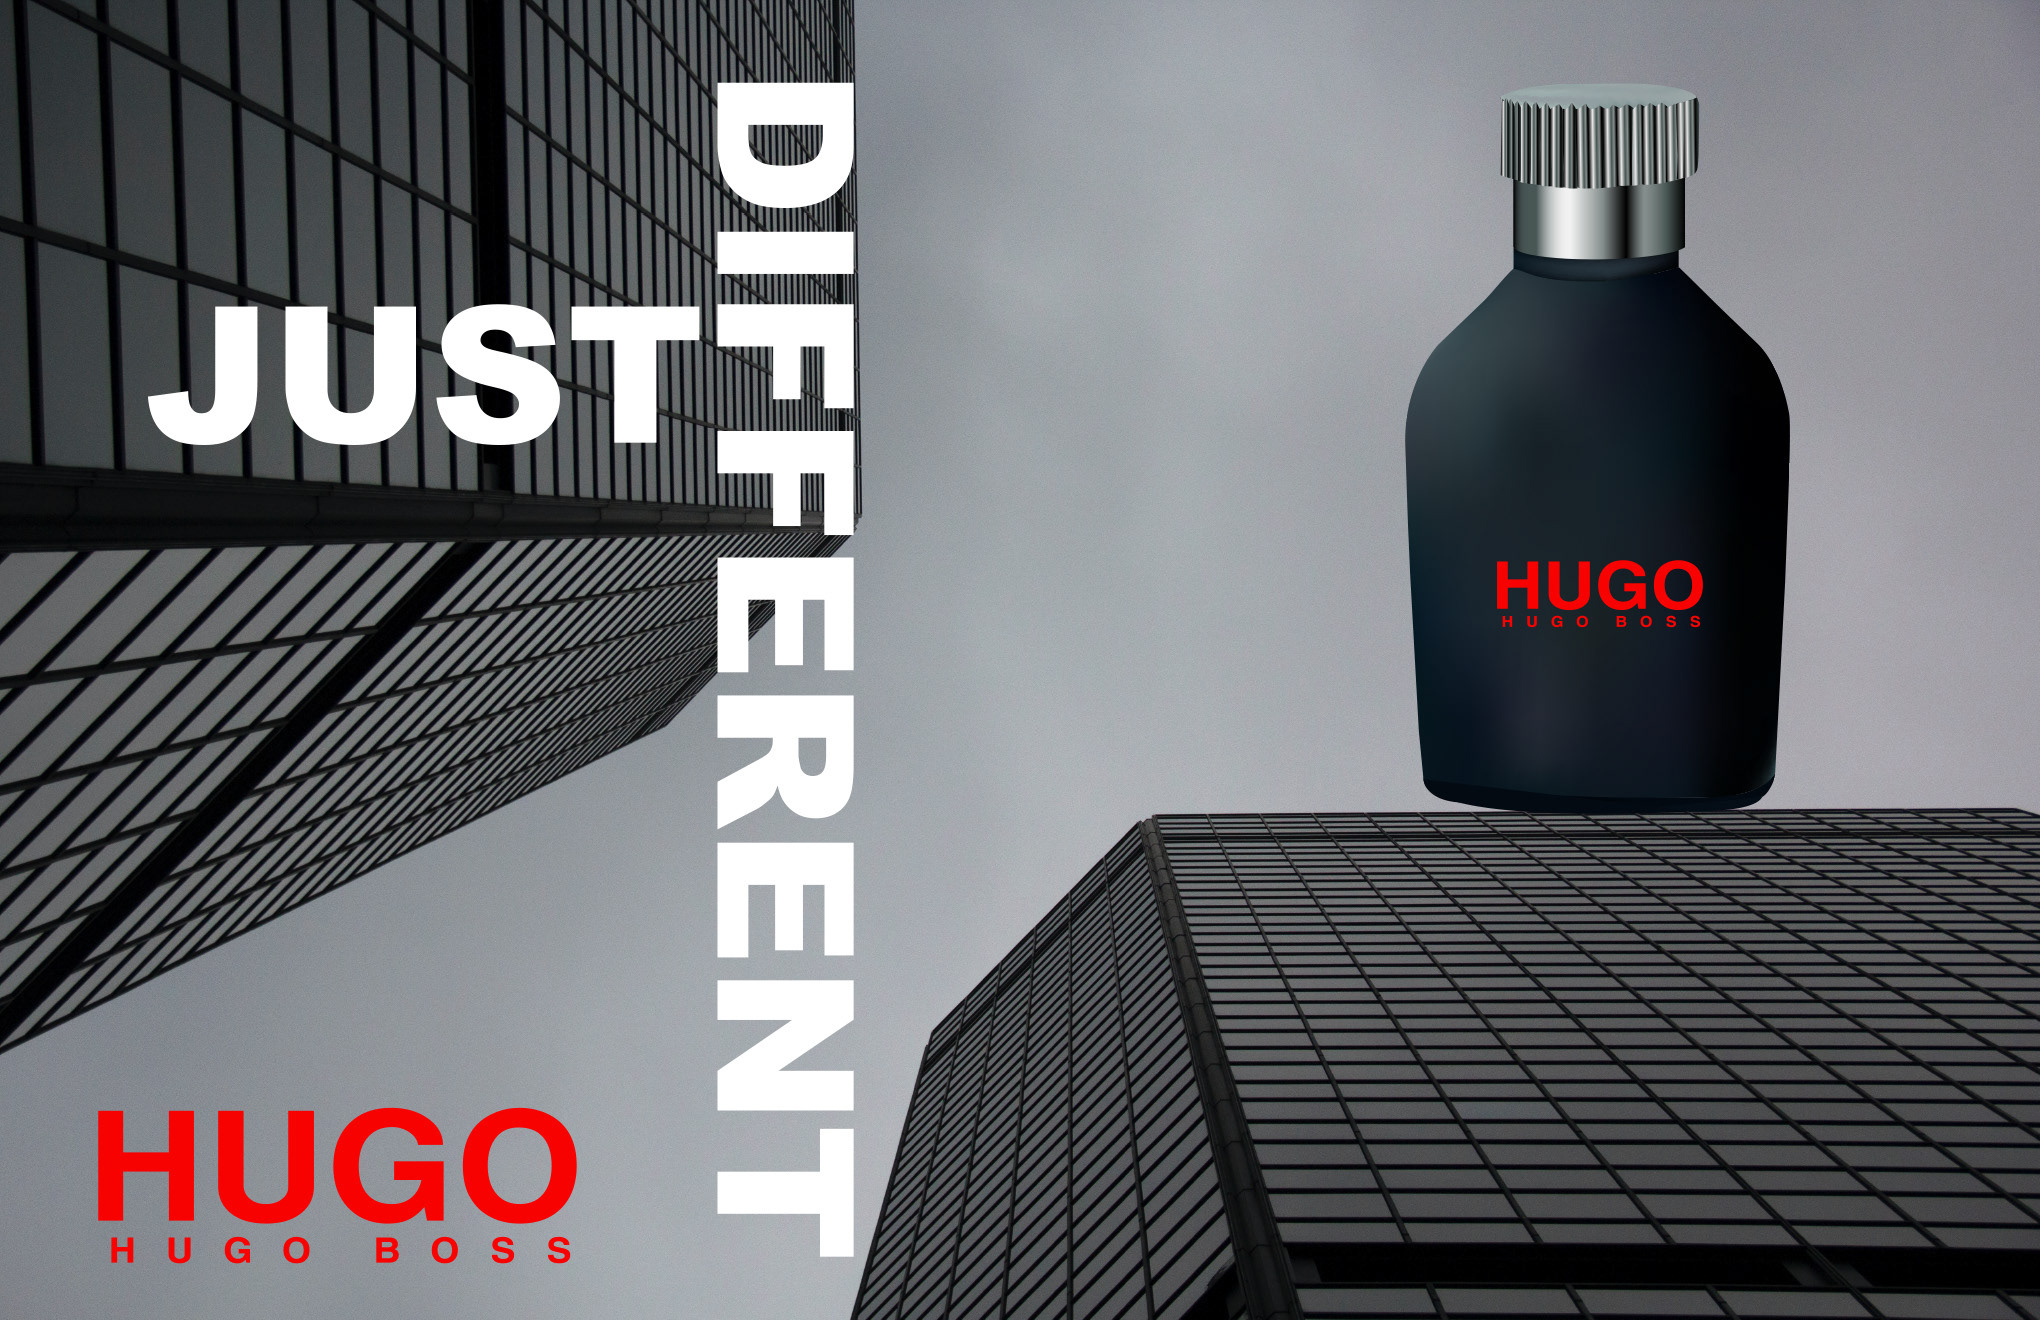 Hugo just different. Hugo Boss just different 125 мл. Hugo Boss just different Хуго босс 150 мл. Hugo just different/ 150мл. Хуго Джаст реклама.